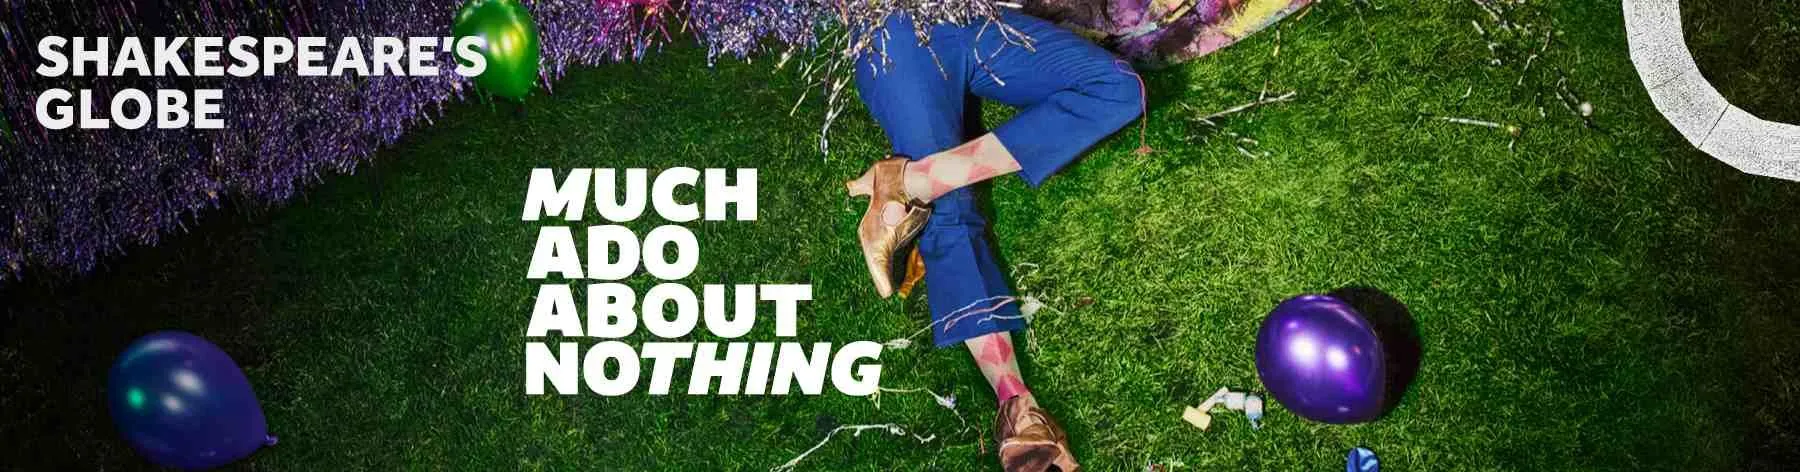 Lucy Bailey brings this tale of love, self-discovery, and jealousy to the Globe Theatre. Get 'Much Ado About Nothing' tickets.